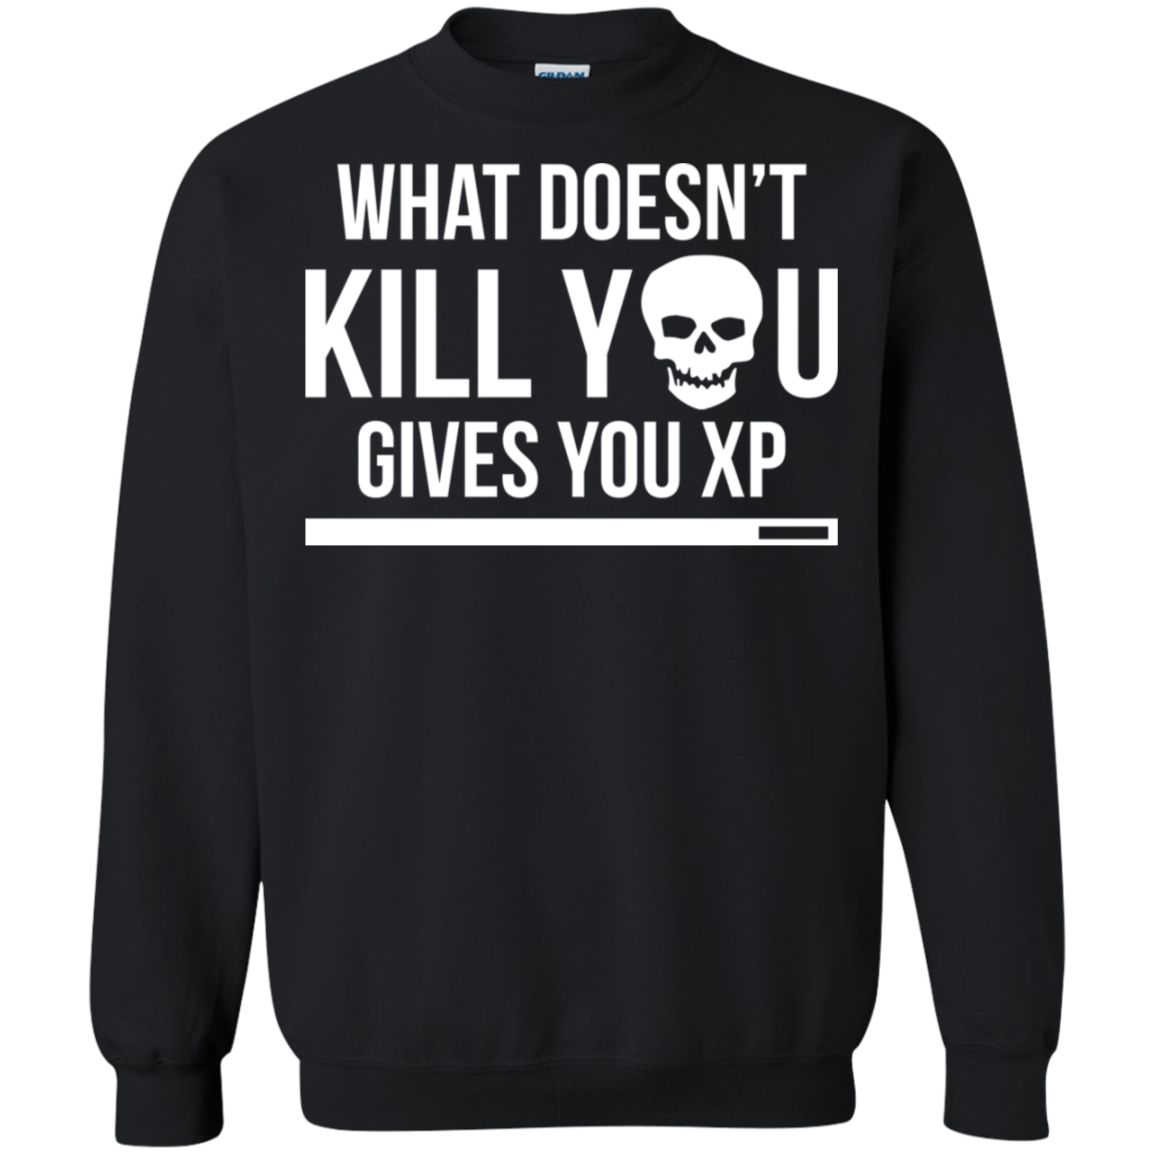 What Doesn't Kill You Gives You XP - Video Gaming Crewneck Pullover Sweatshirt  8 oz.